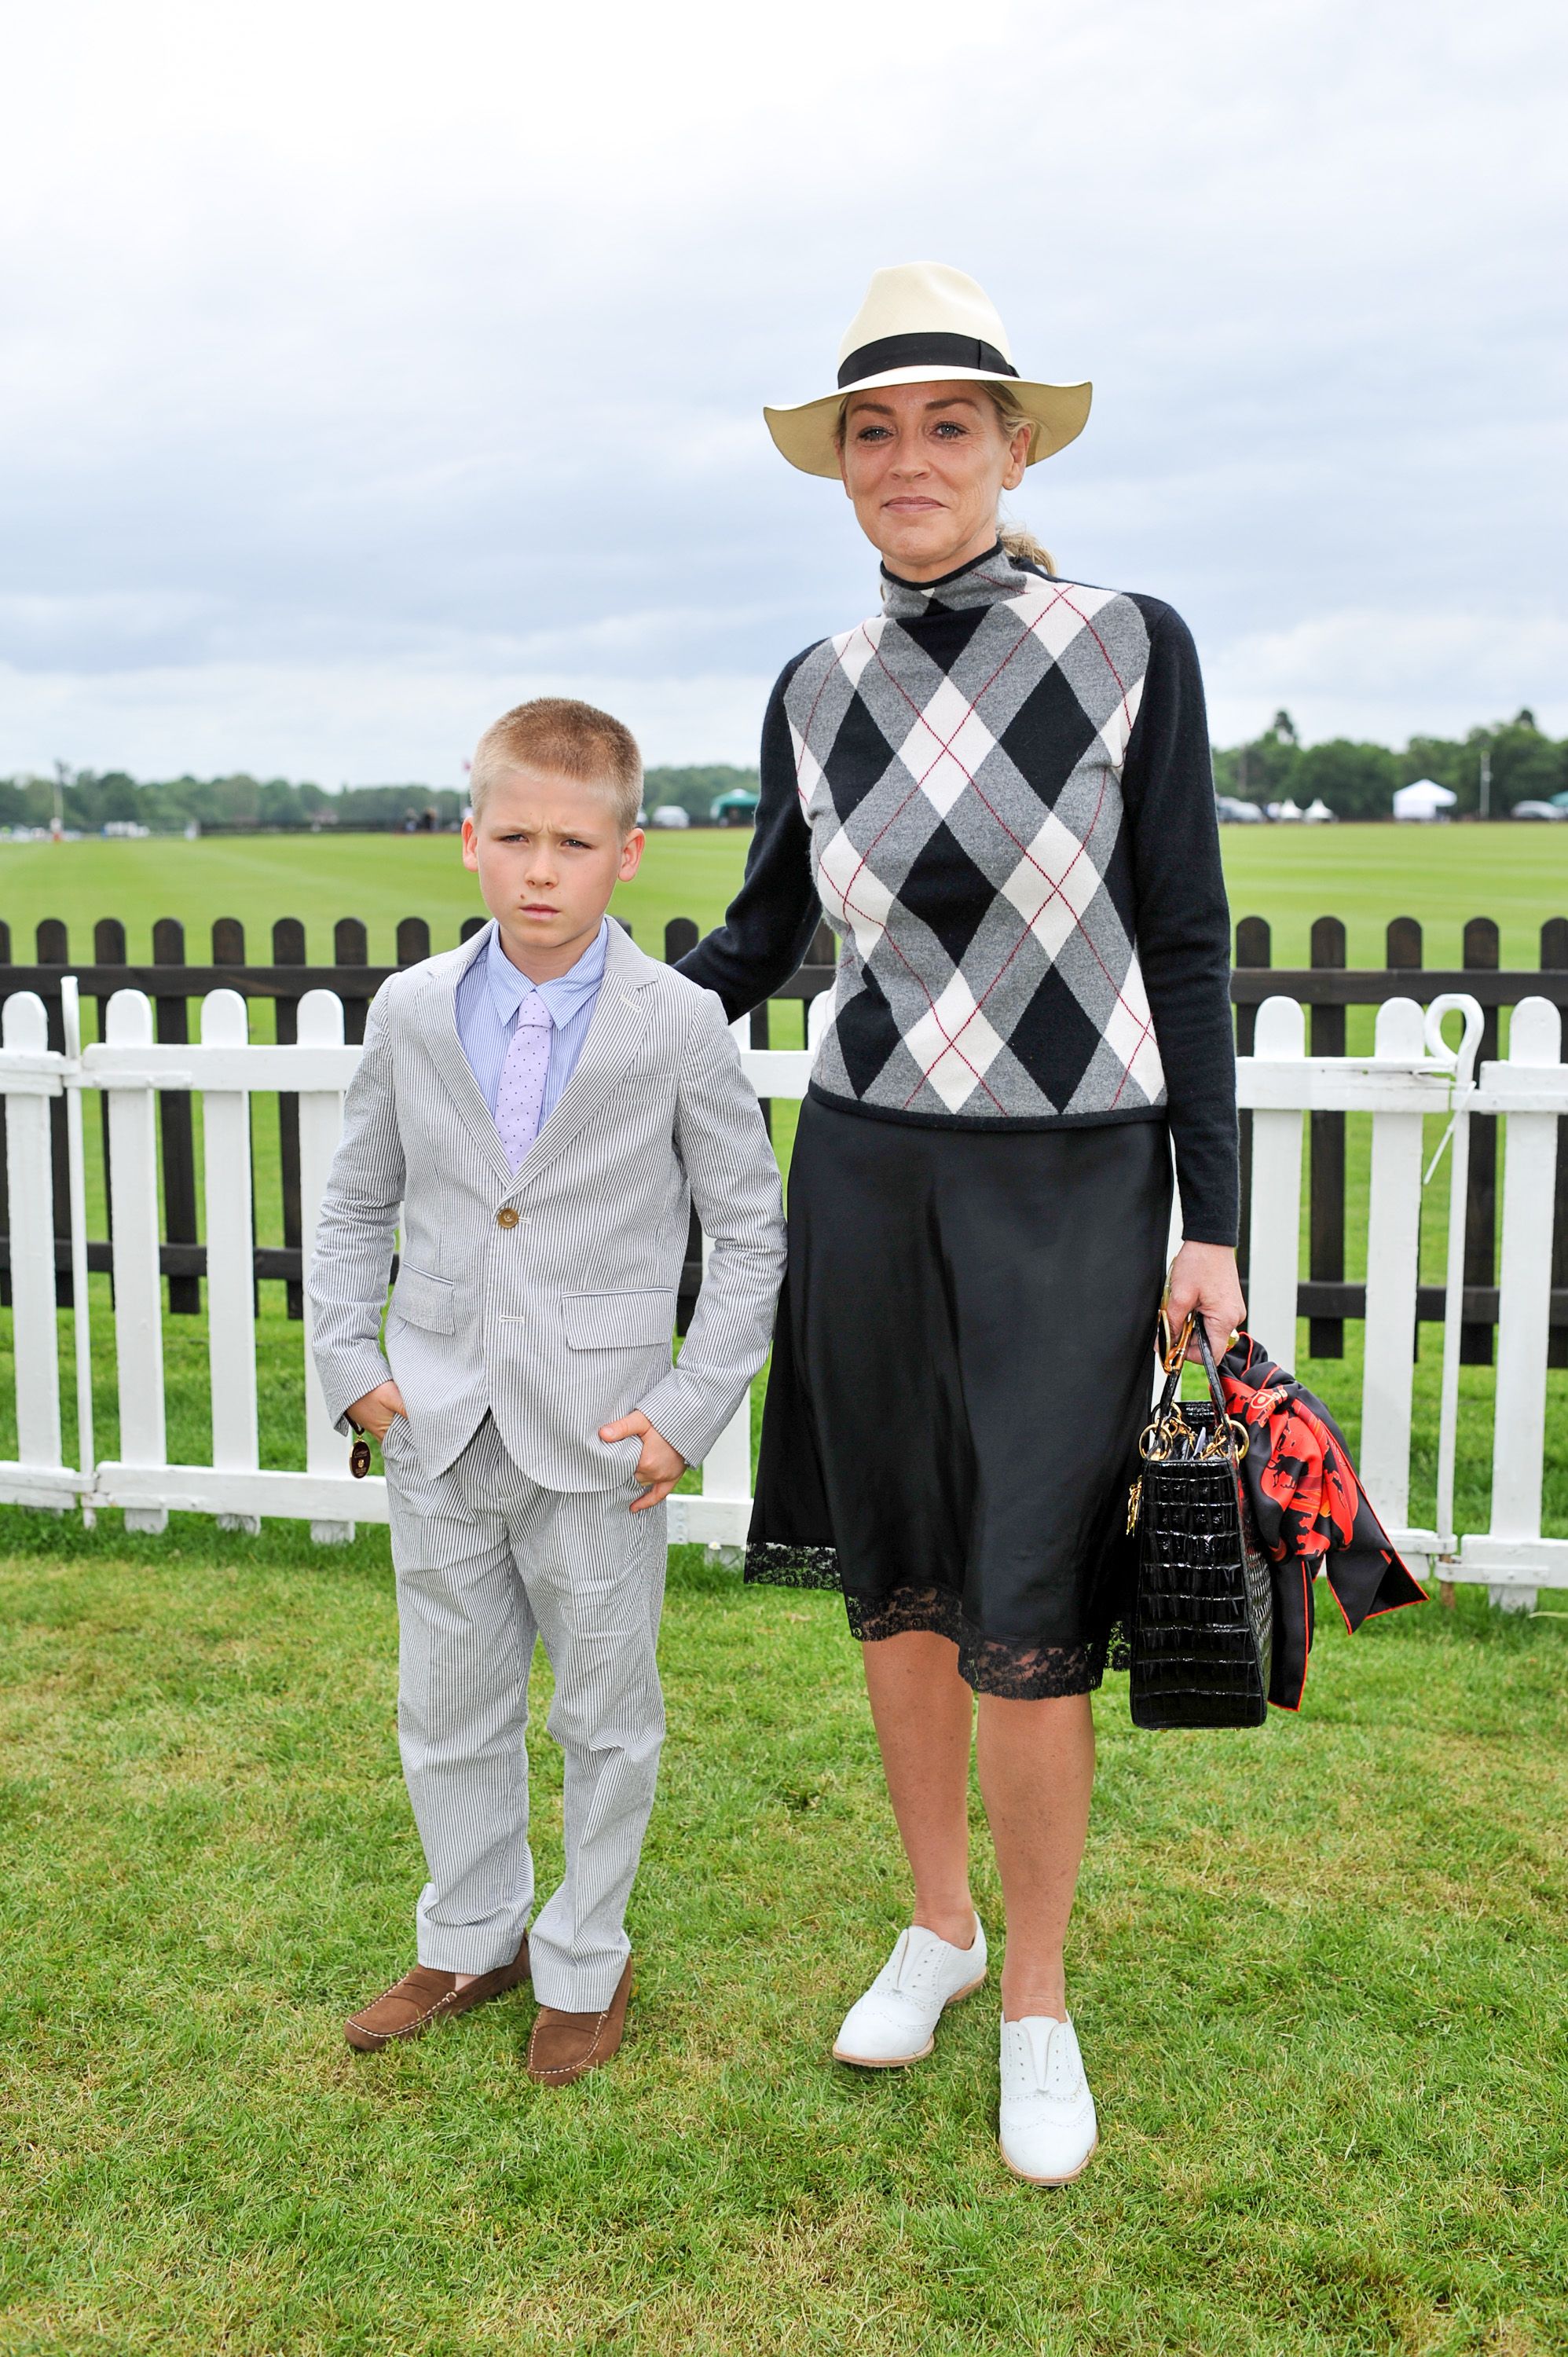 Sharon Stone and son Roan at the Cartier Queen's Cup final in 2013 in Egham, England | Source: Getty Images